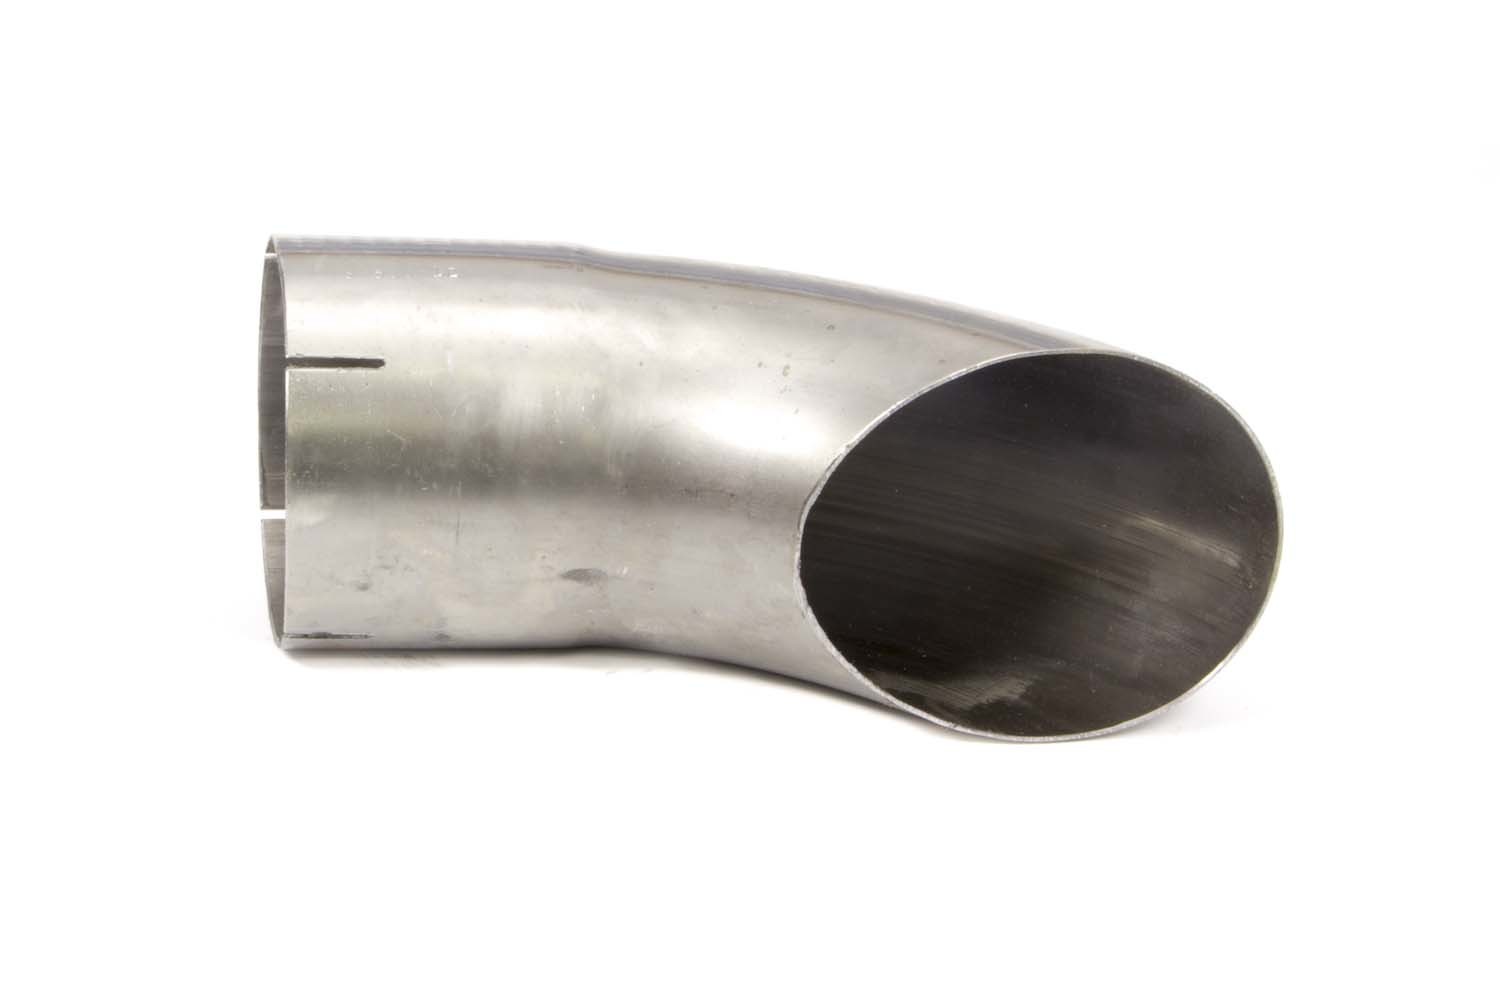 Schoenfeld Headers 5025 Exhaust Tip, Clamp-On, 5 in Inlet, 5 in Round Outlet, 12 in Long, Single Wall, Cut Edge, Angled Cut, Turnout Style, Steel, Natural, Each